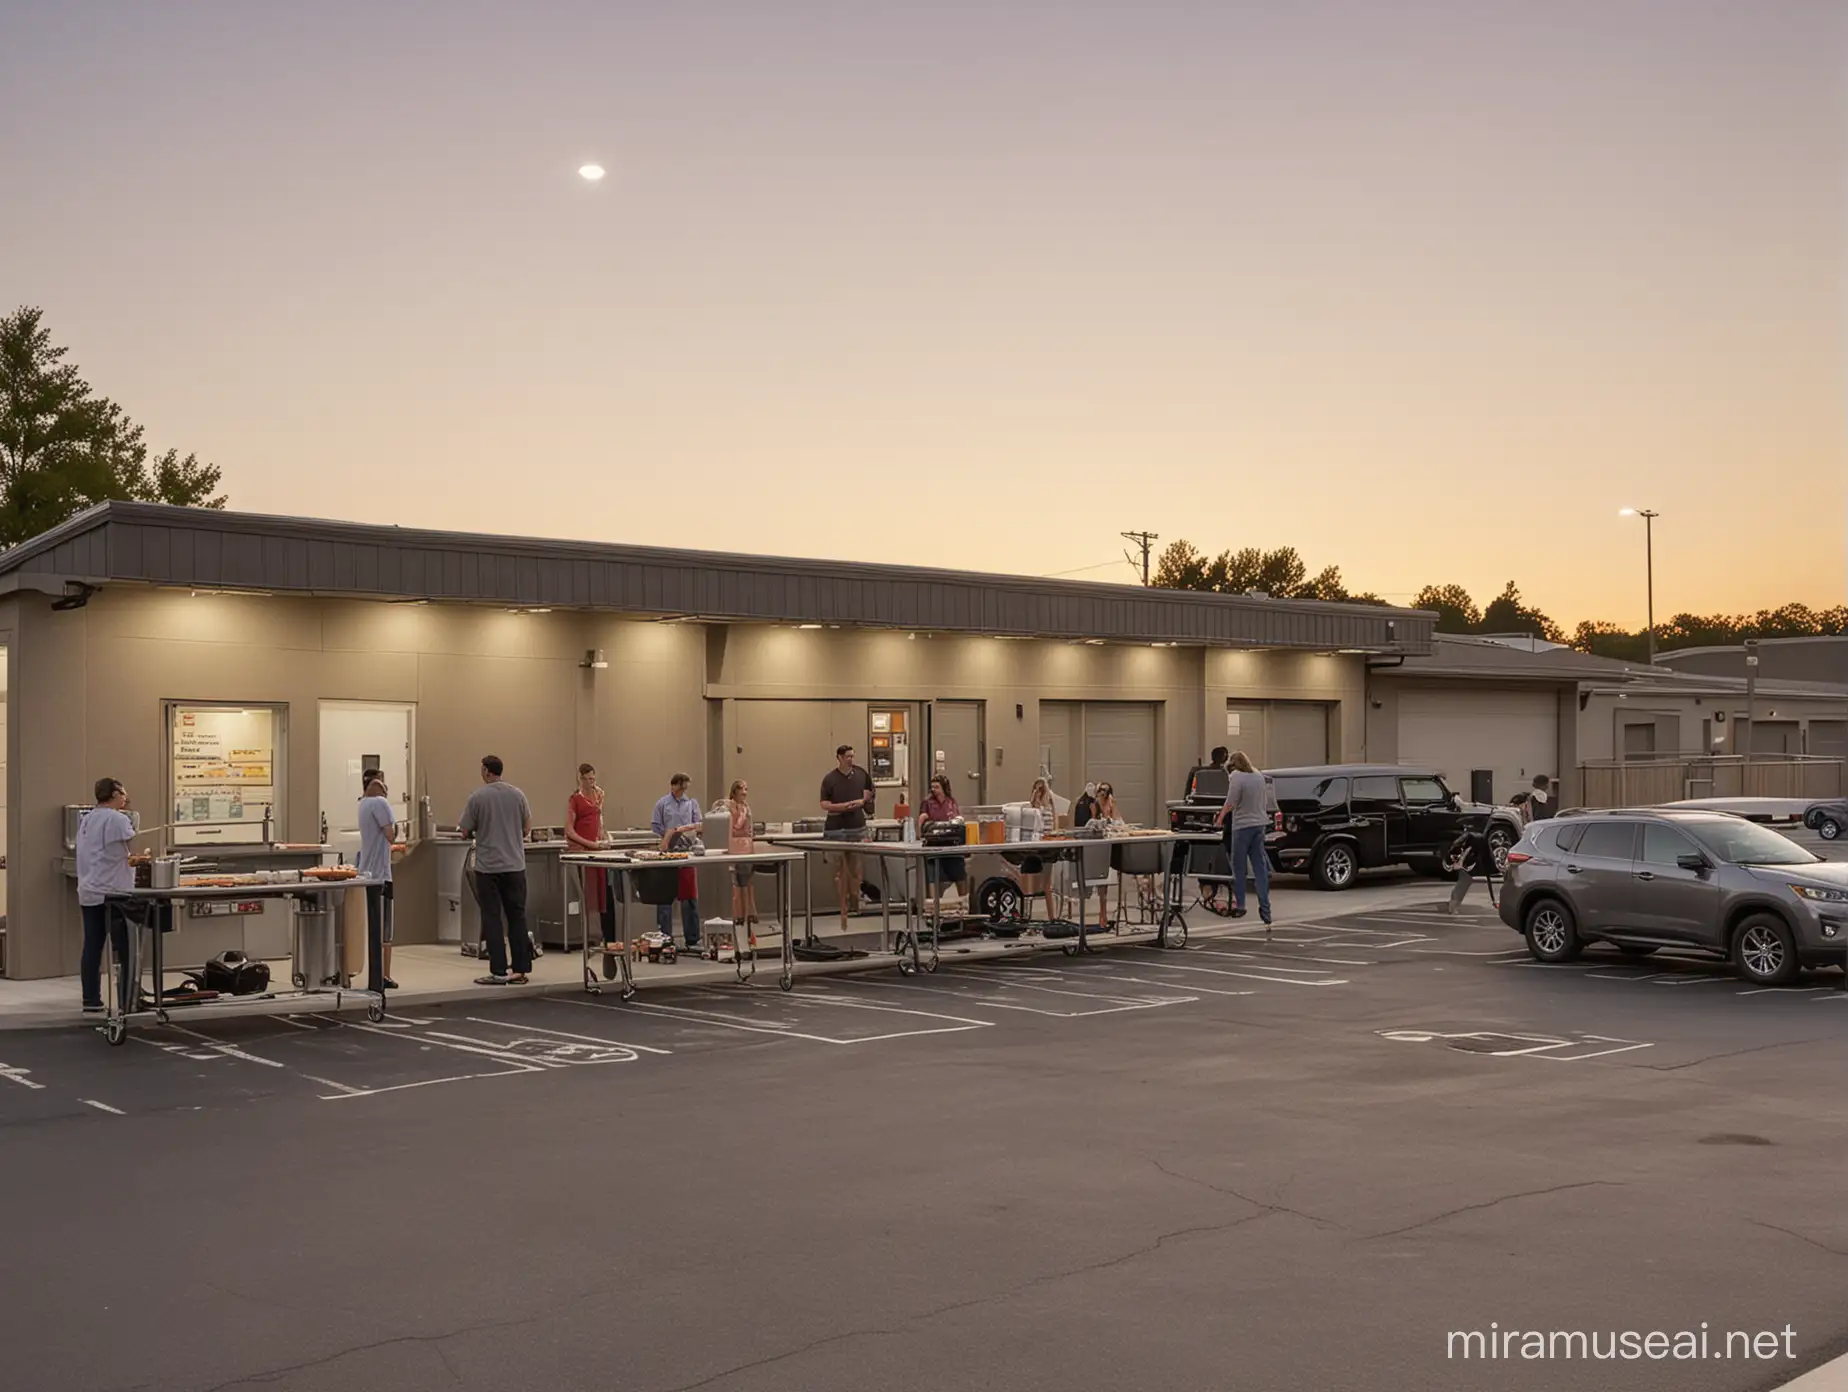 Outdoor BBQ Gathering at Sunset in Front of Car Maintenance Garage